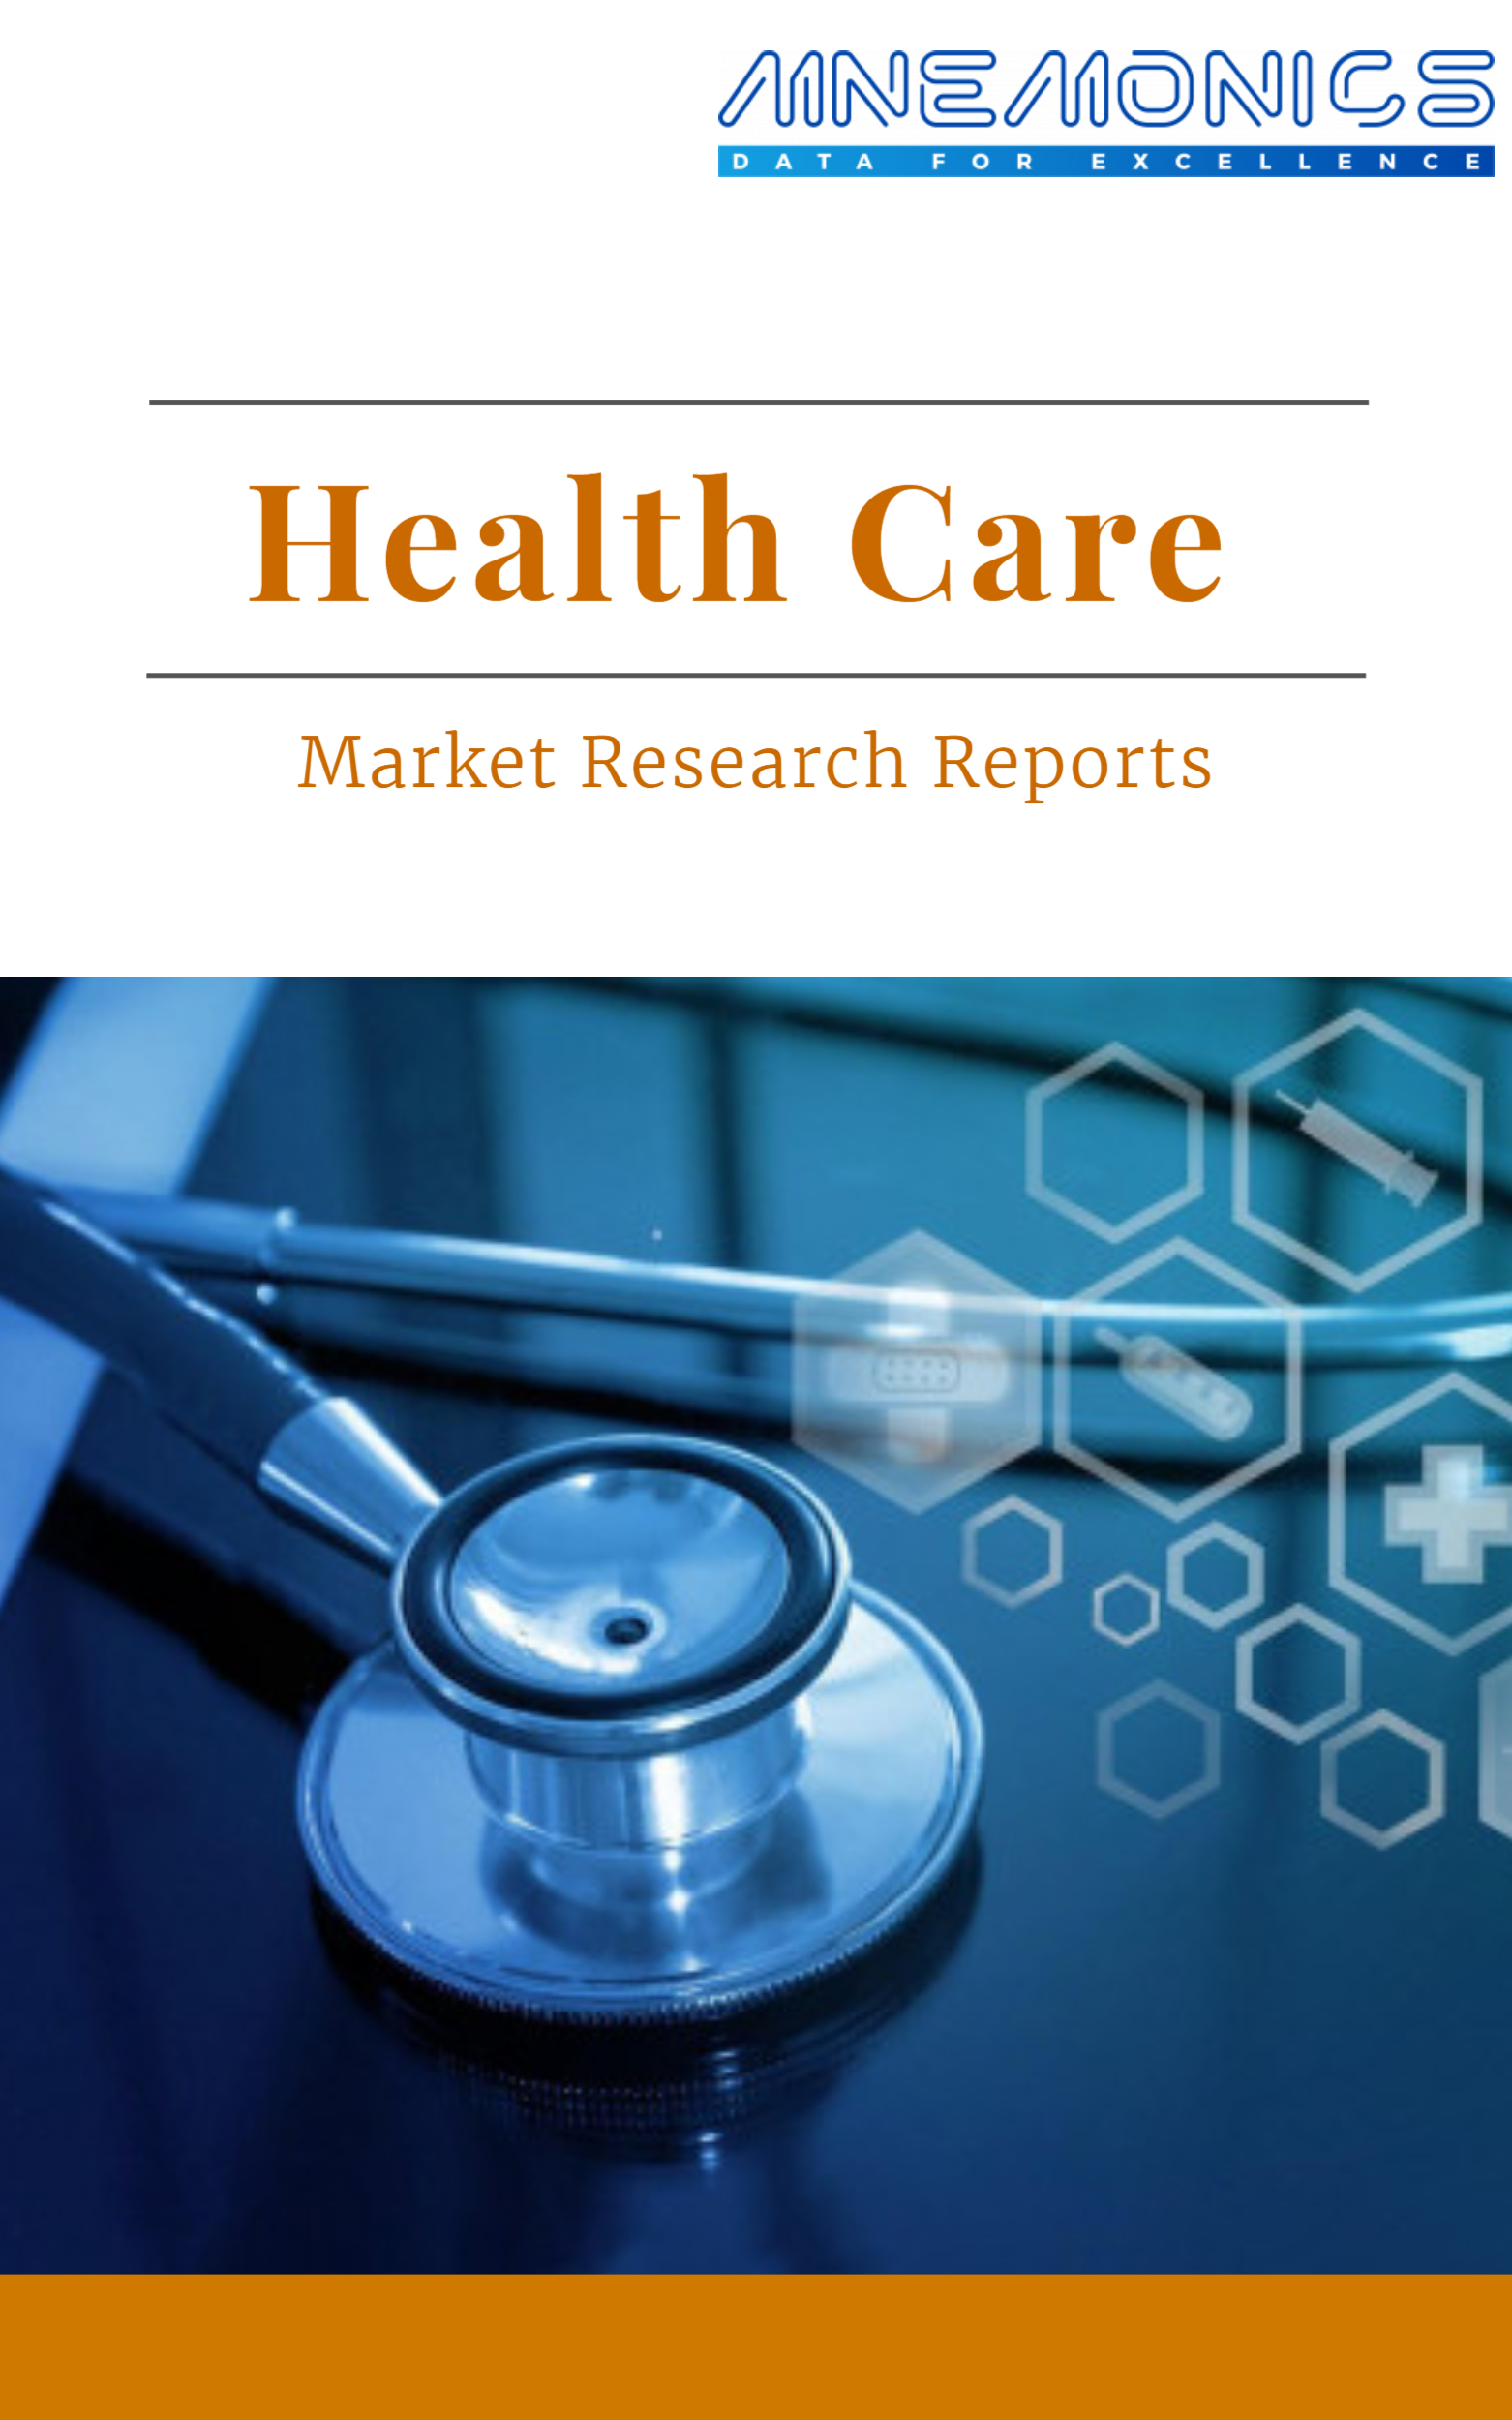 Internet of Medical Things Market (IOMT)